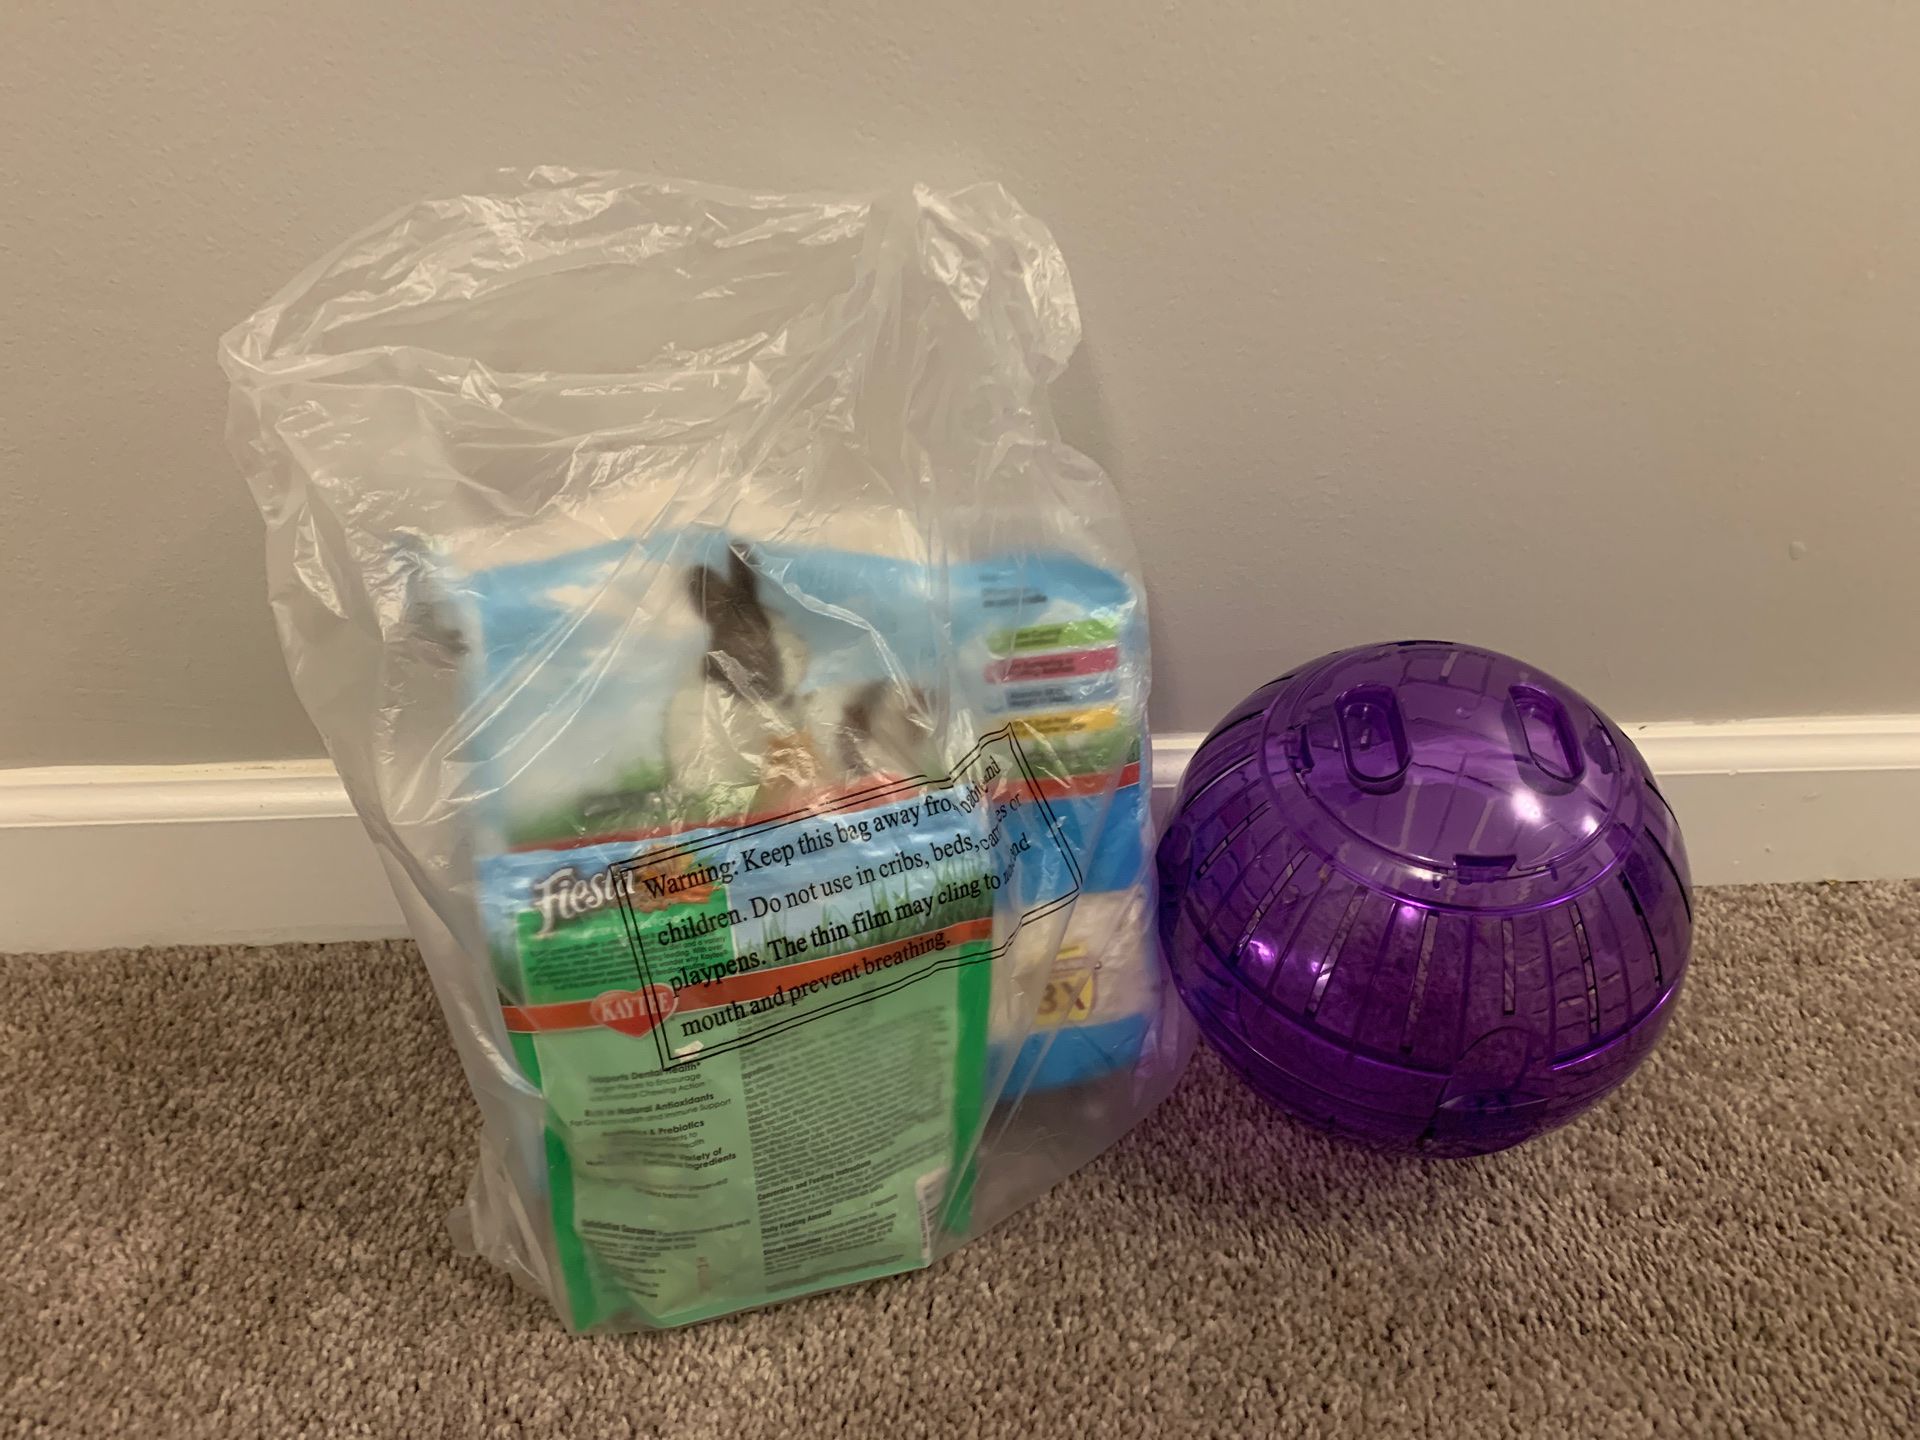 Hamster ball and other items